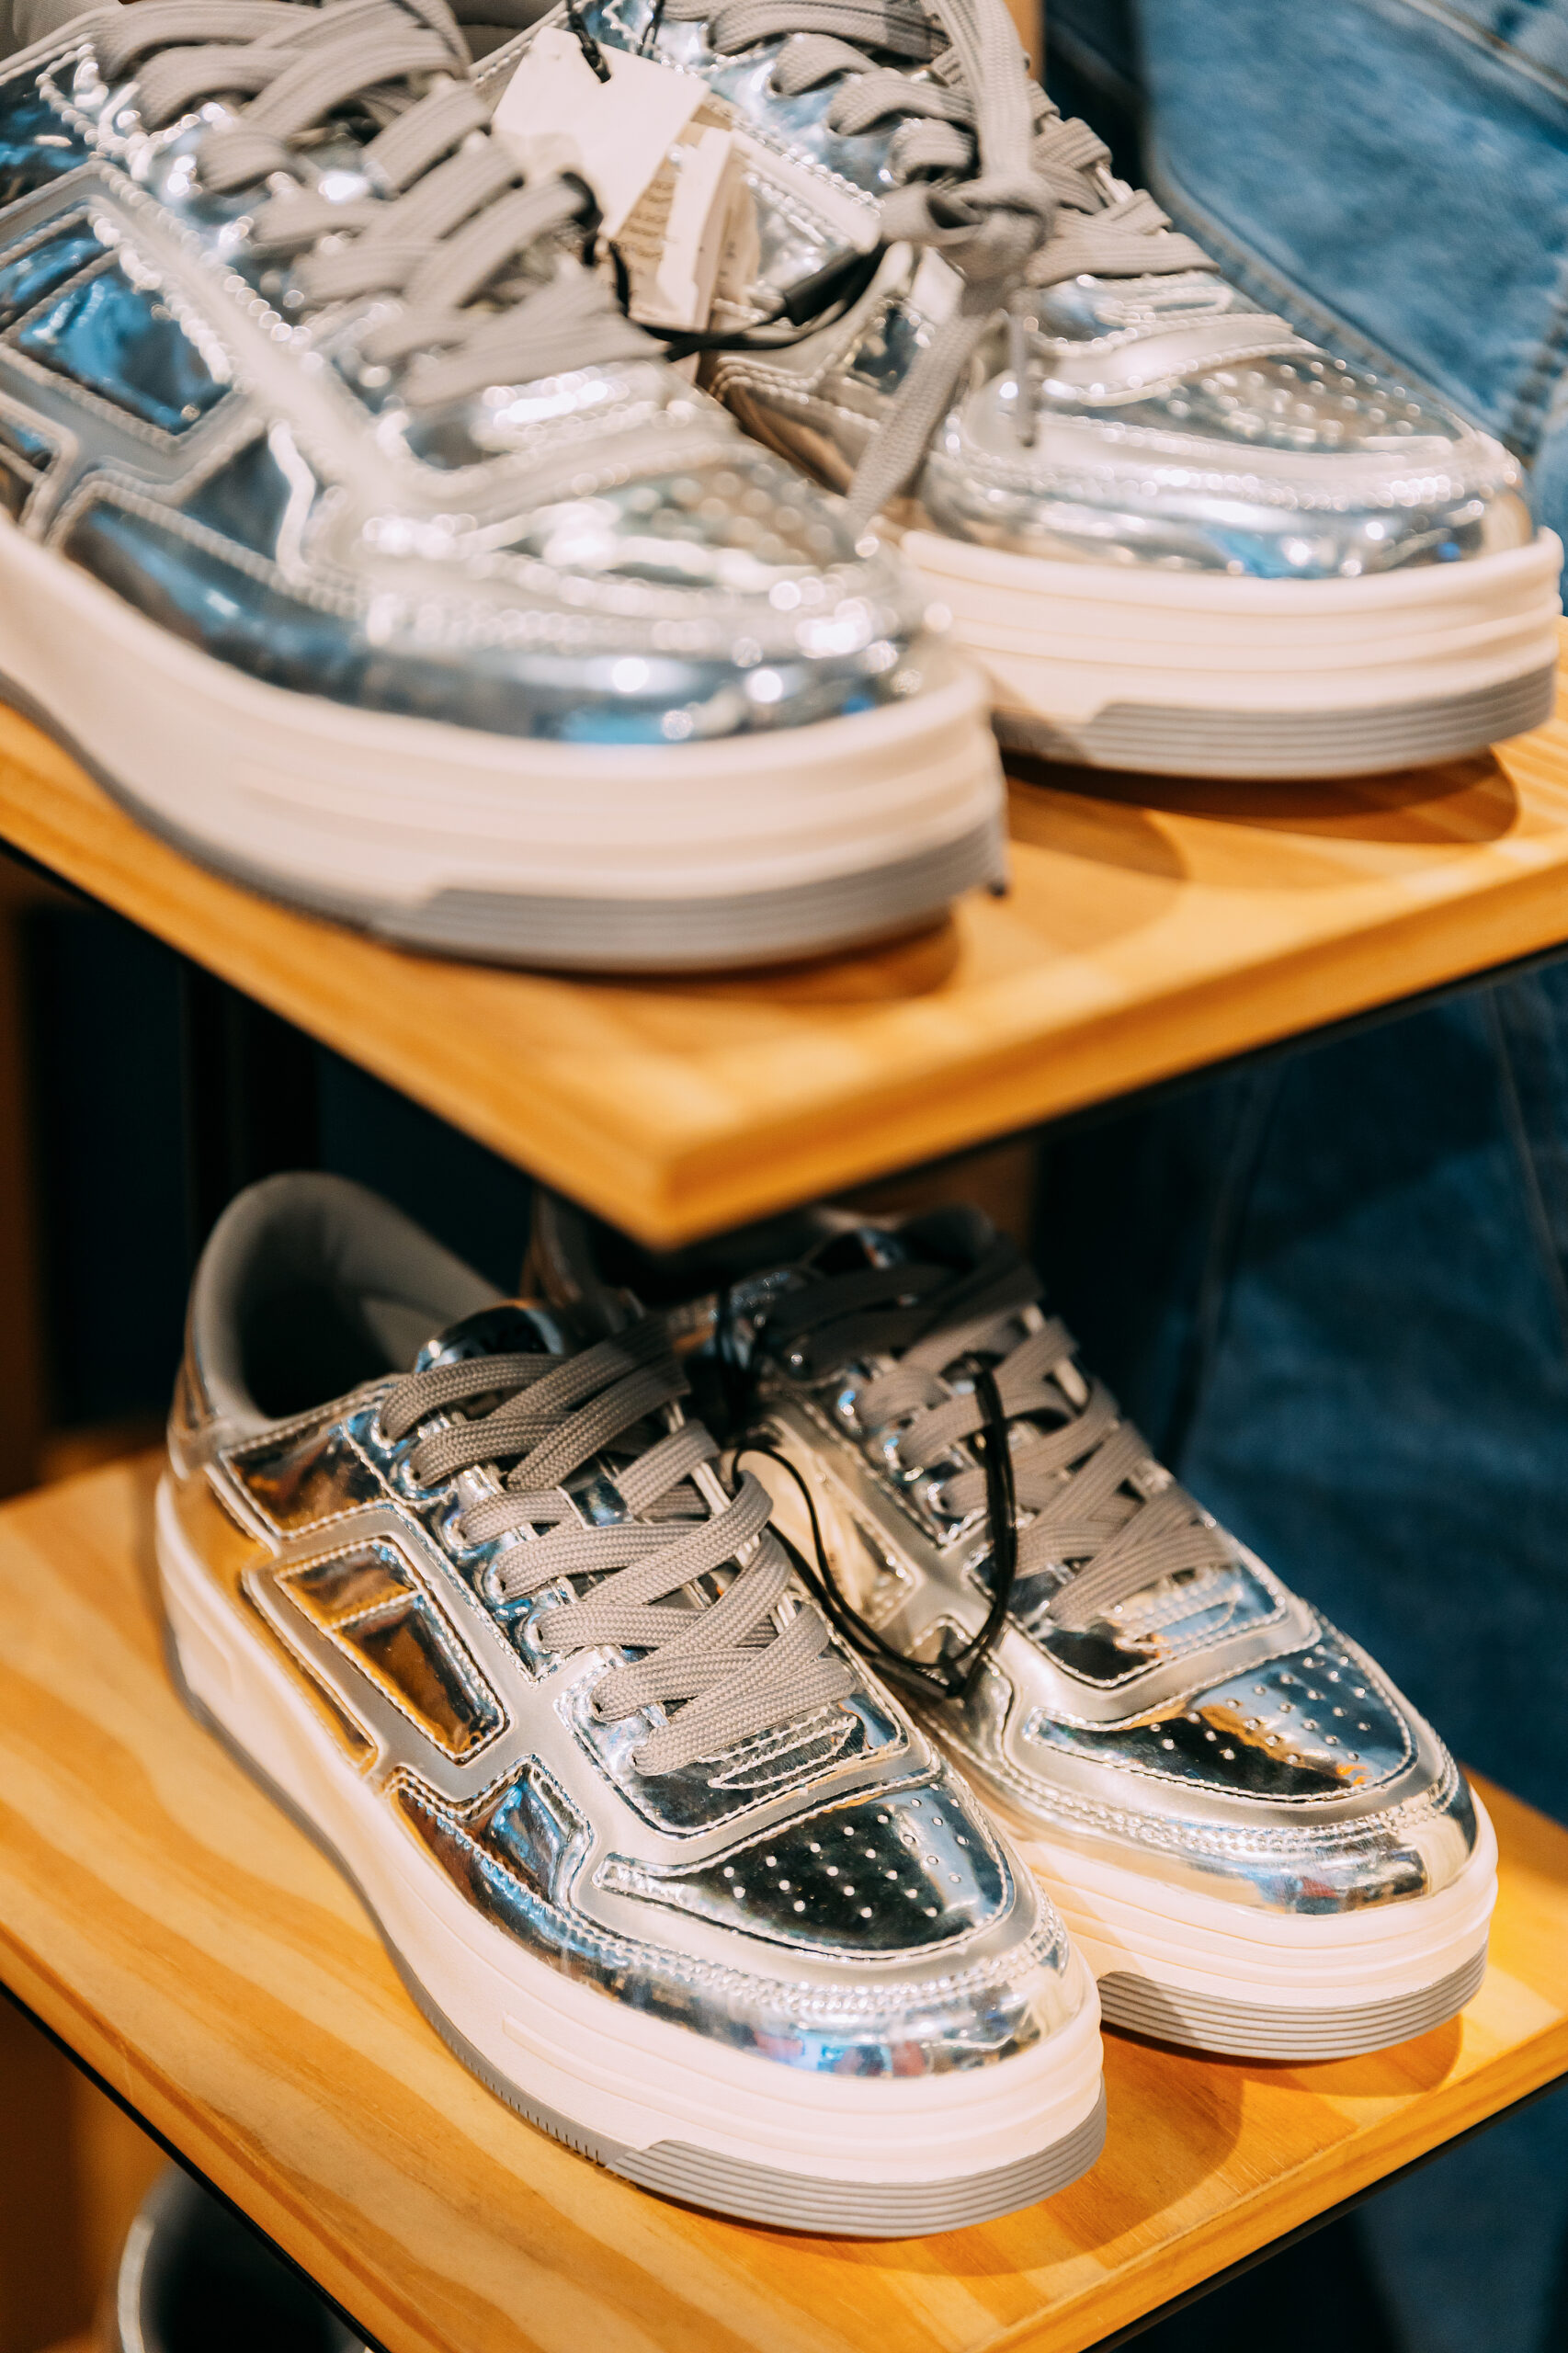 Silver Sneakers and How to be Eligible